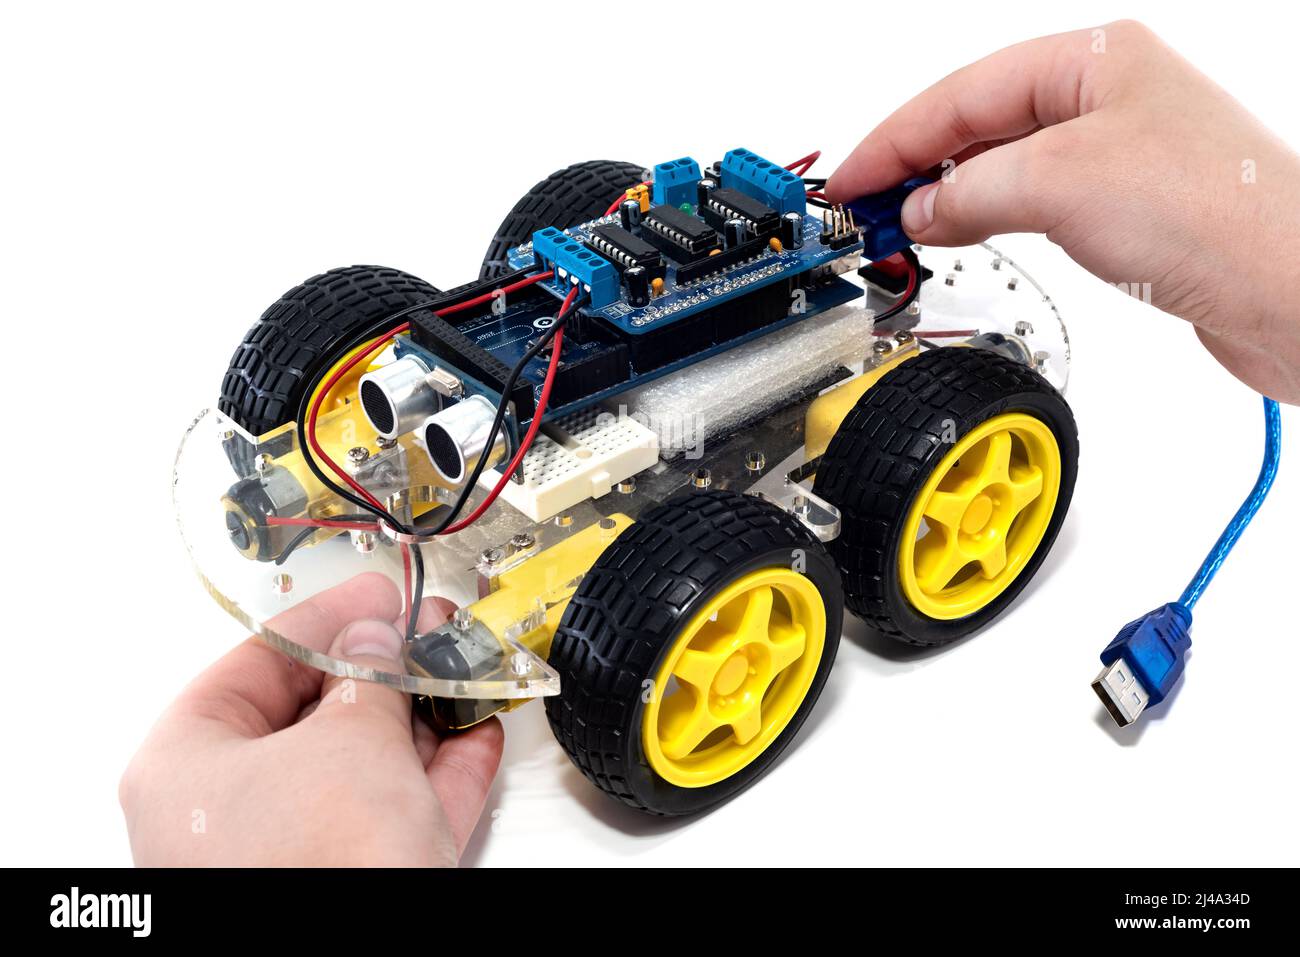 Hands holding programmable robotic car with obstacle avoidance and line following ability, isolated on white background with clipping path. Car on a m Stock Photo